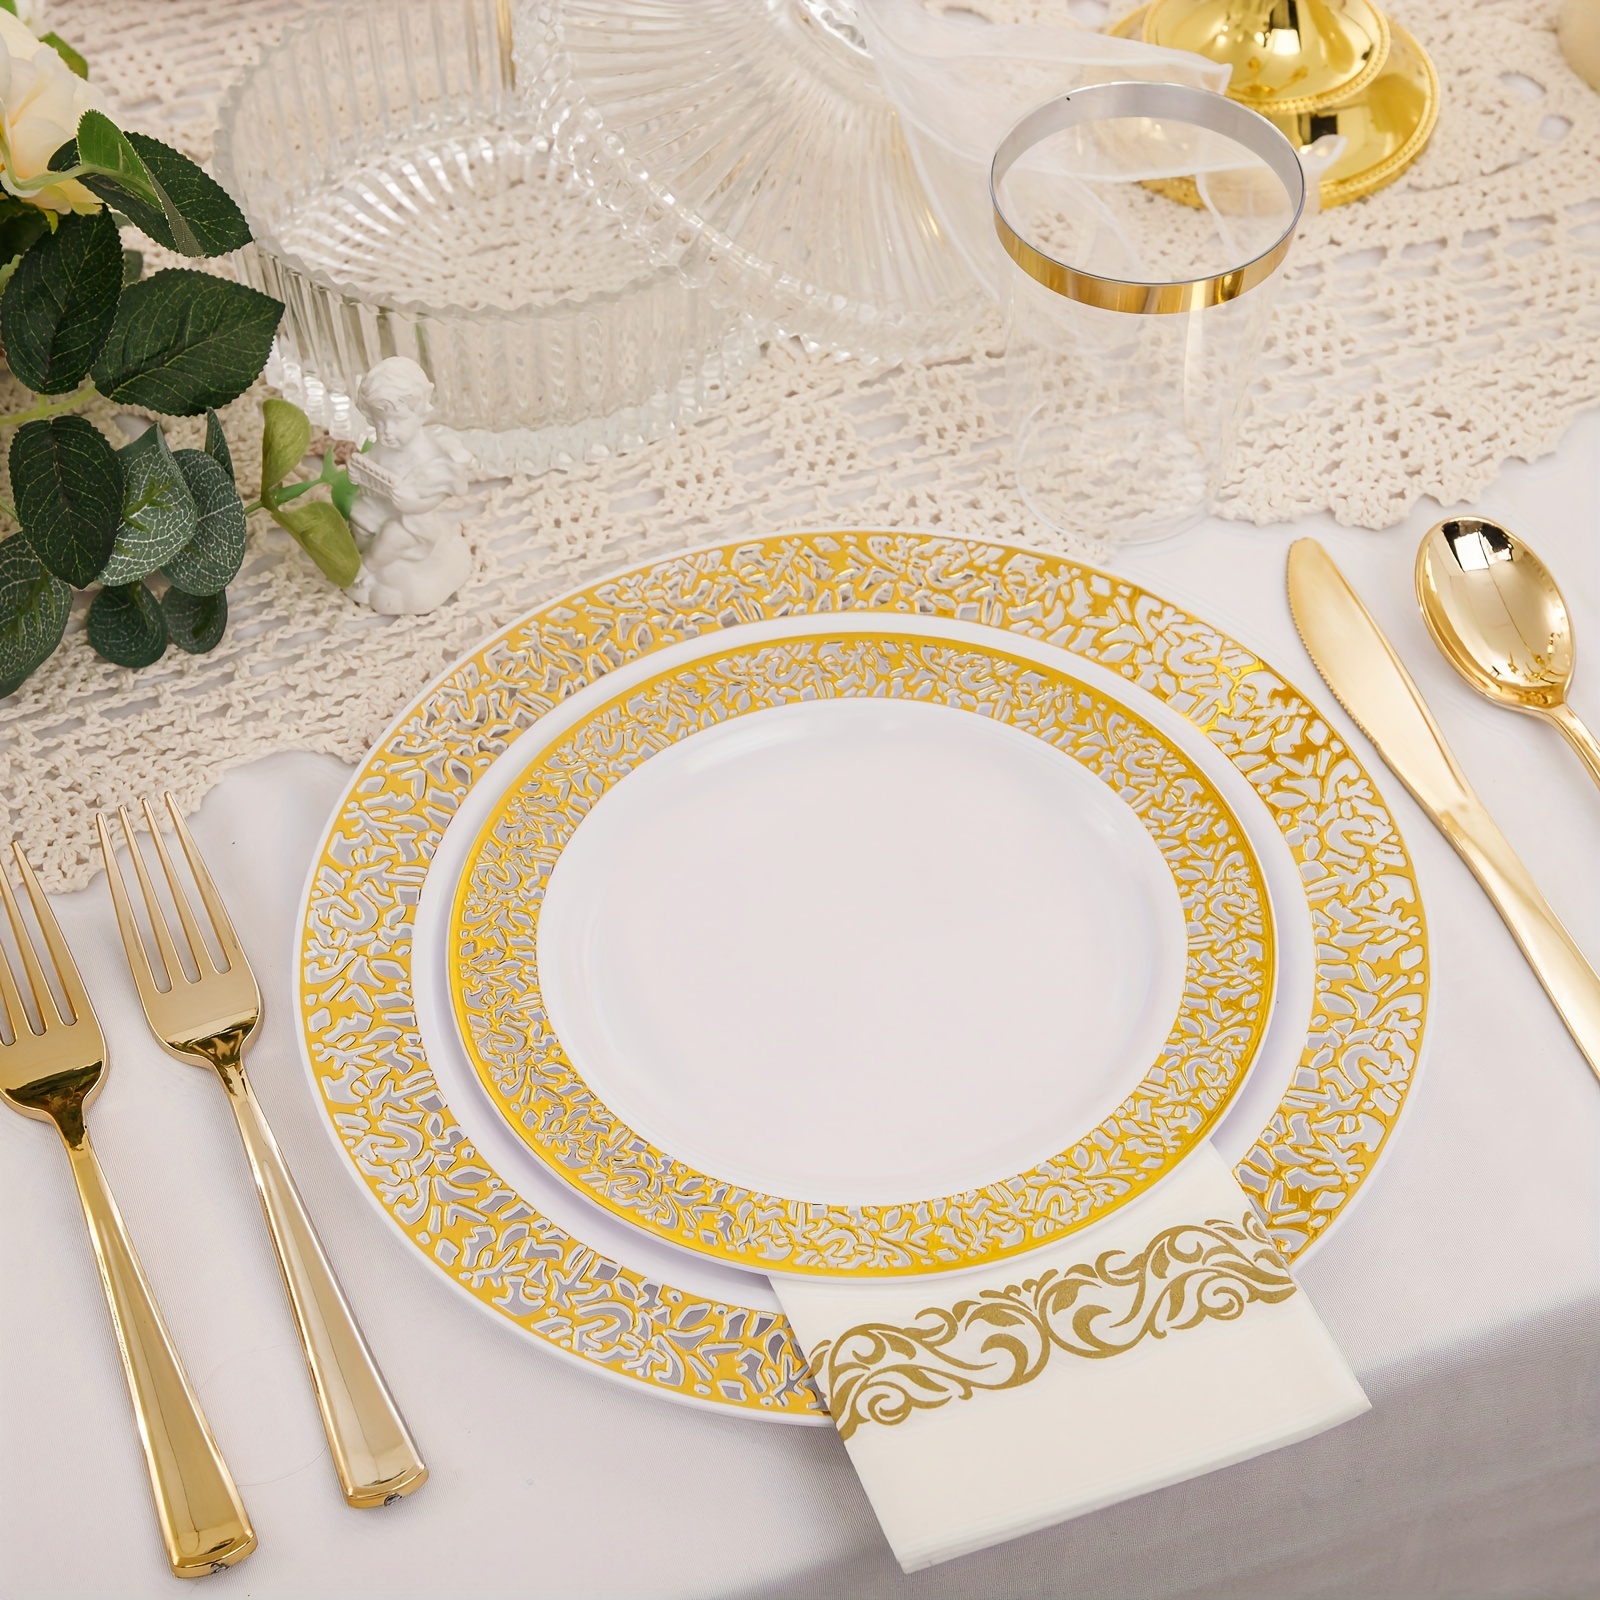 7.5 Lace White Plastic Salad Plates - Smarty Had A Party